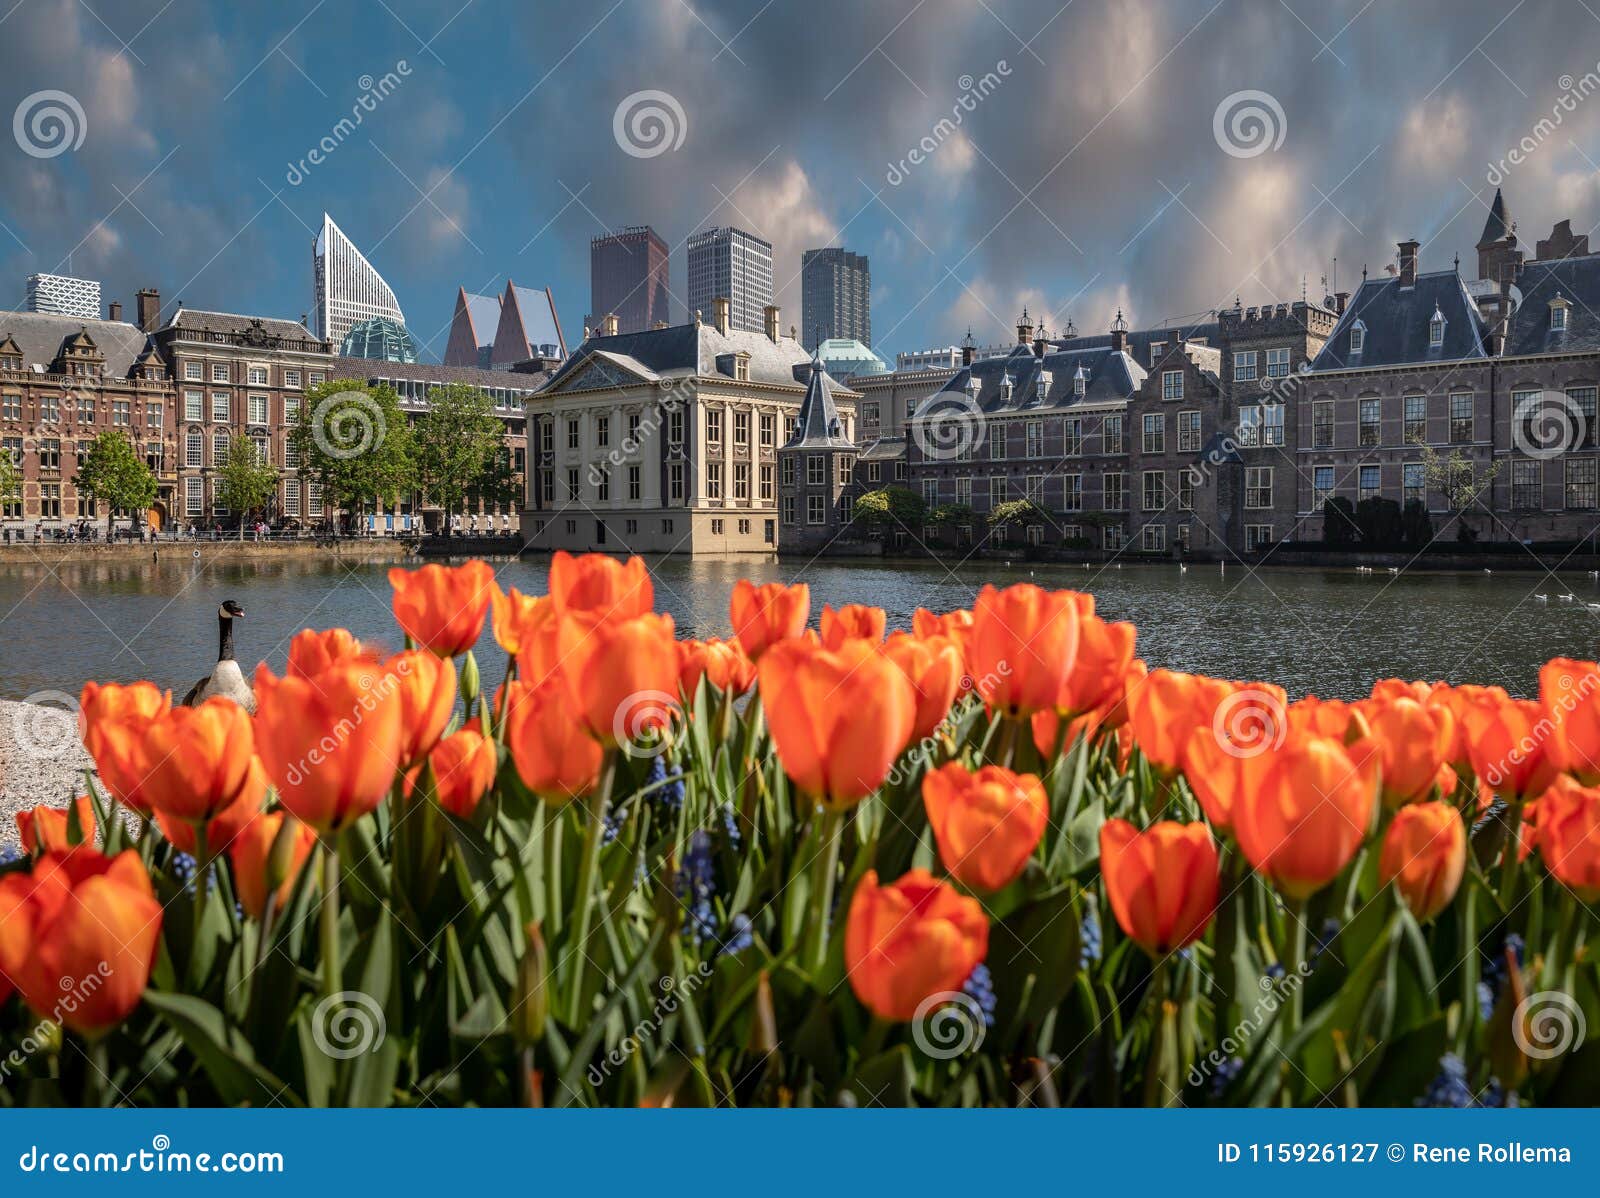 parlement buildings combinate with dutch tulips.